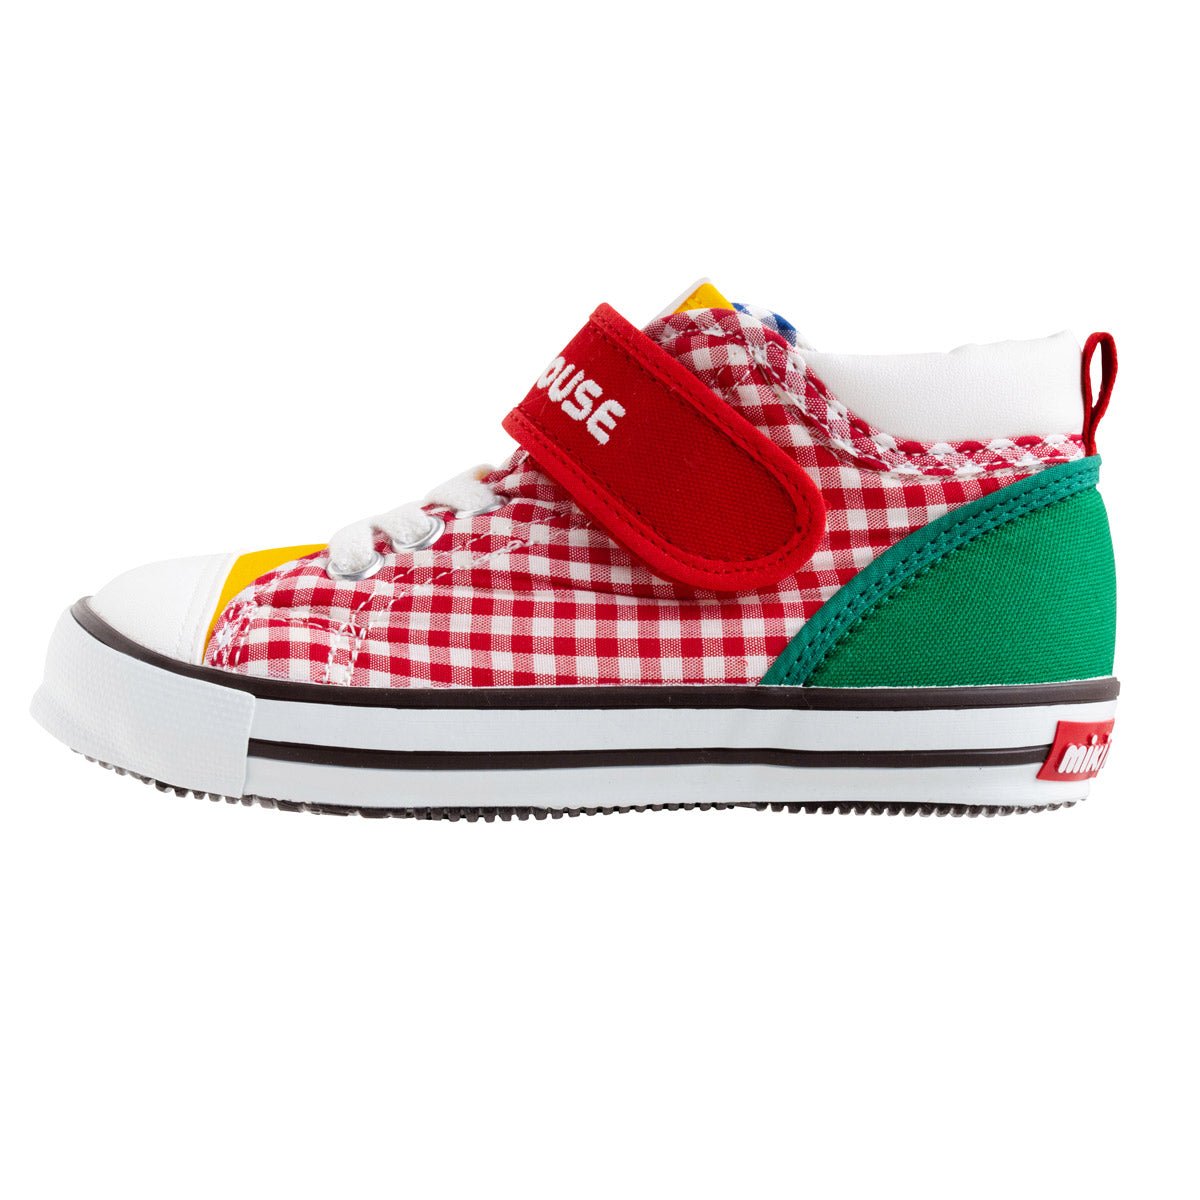 High Top sneaker for Kids - Patchwork Gingham - MIKI HOUSE USA